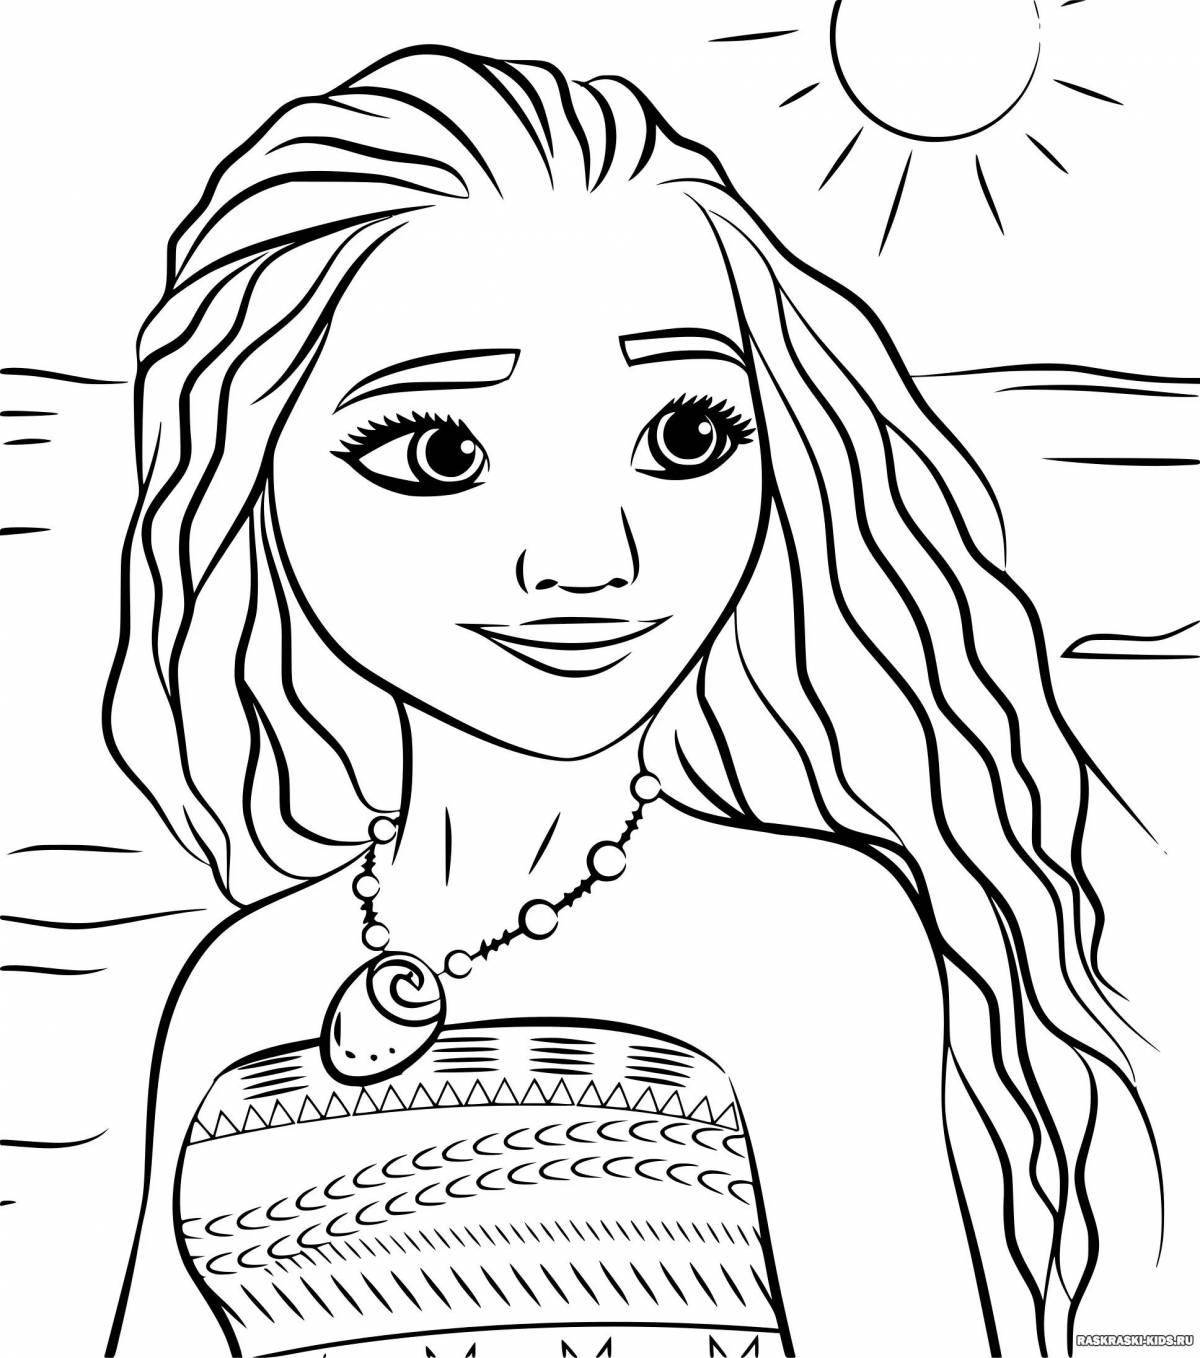 Serene moana coloring book for girls